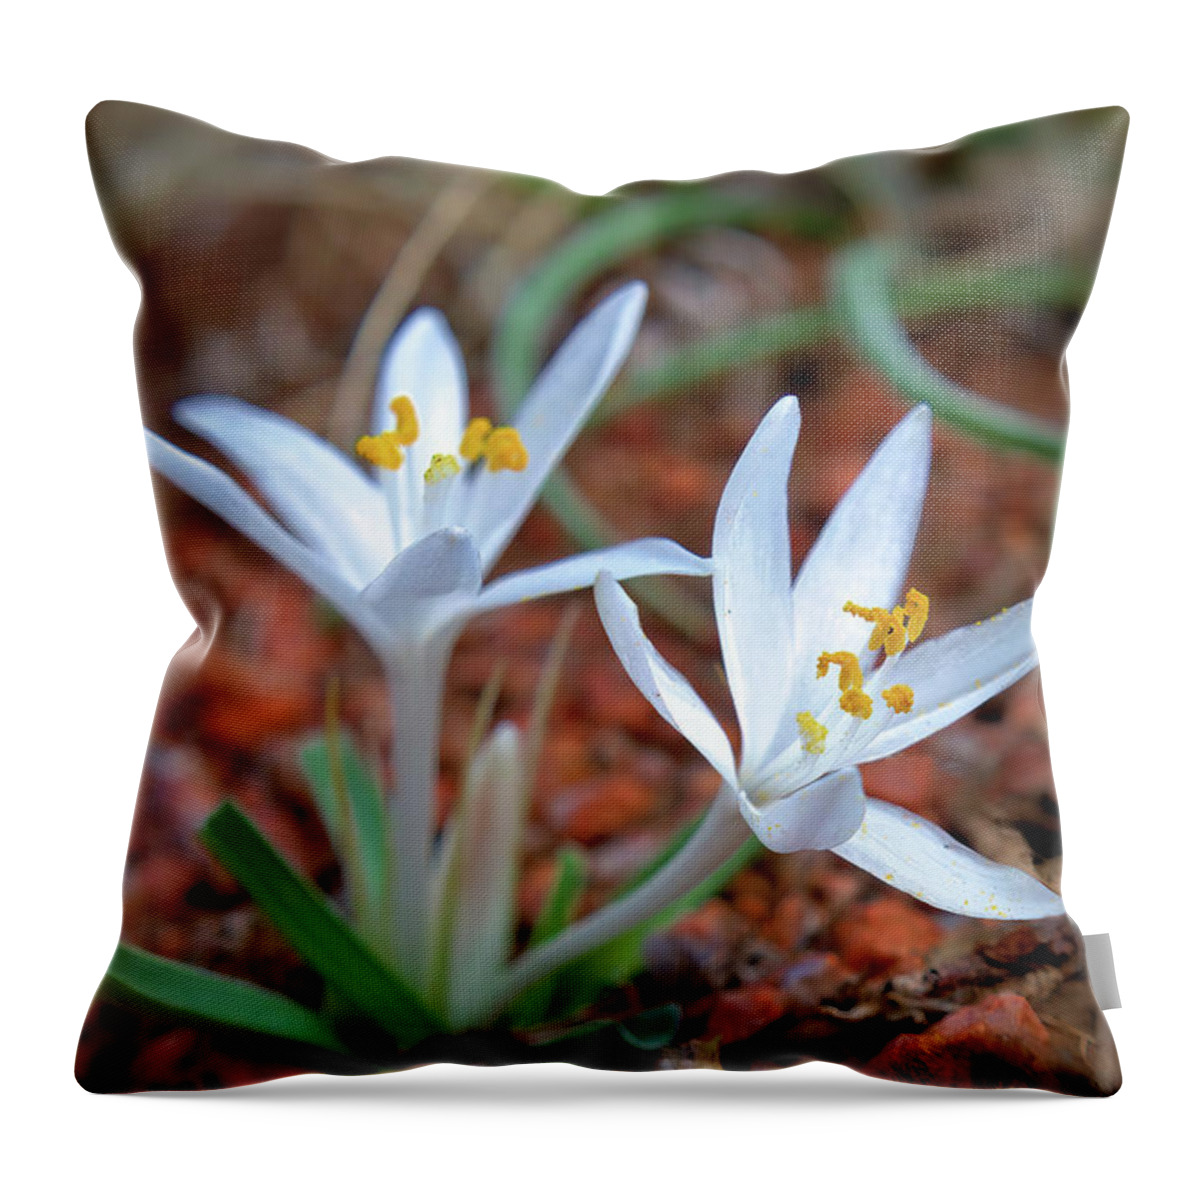 Wildflowers Throw Pillow featuring the photograph Two Sand Lilies by Bob Falcone